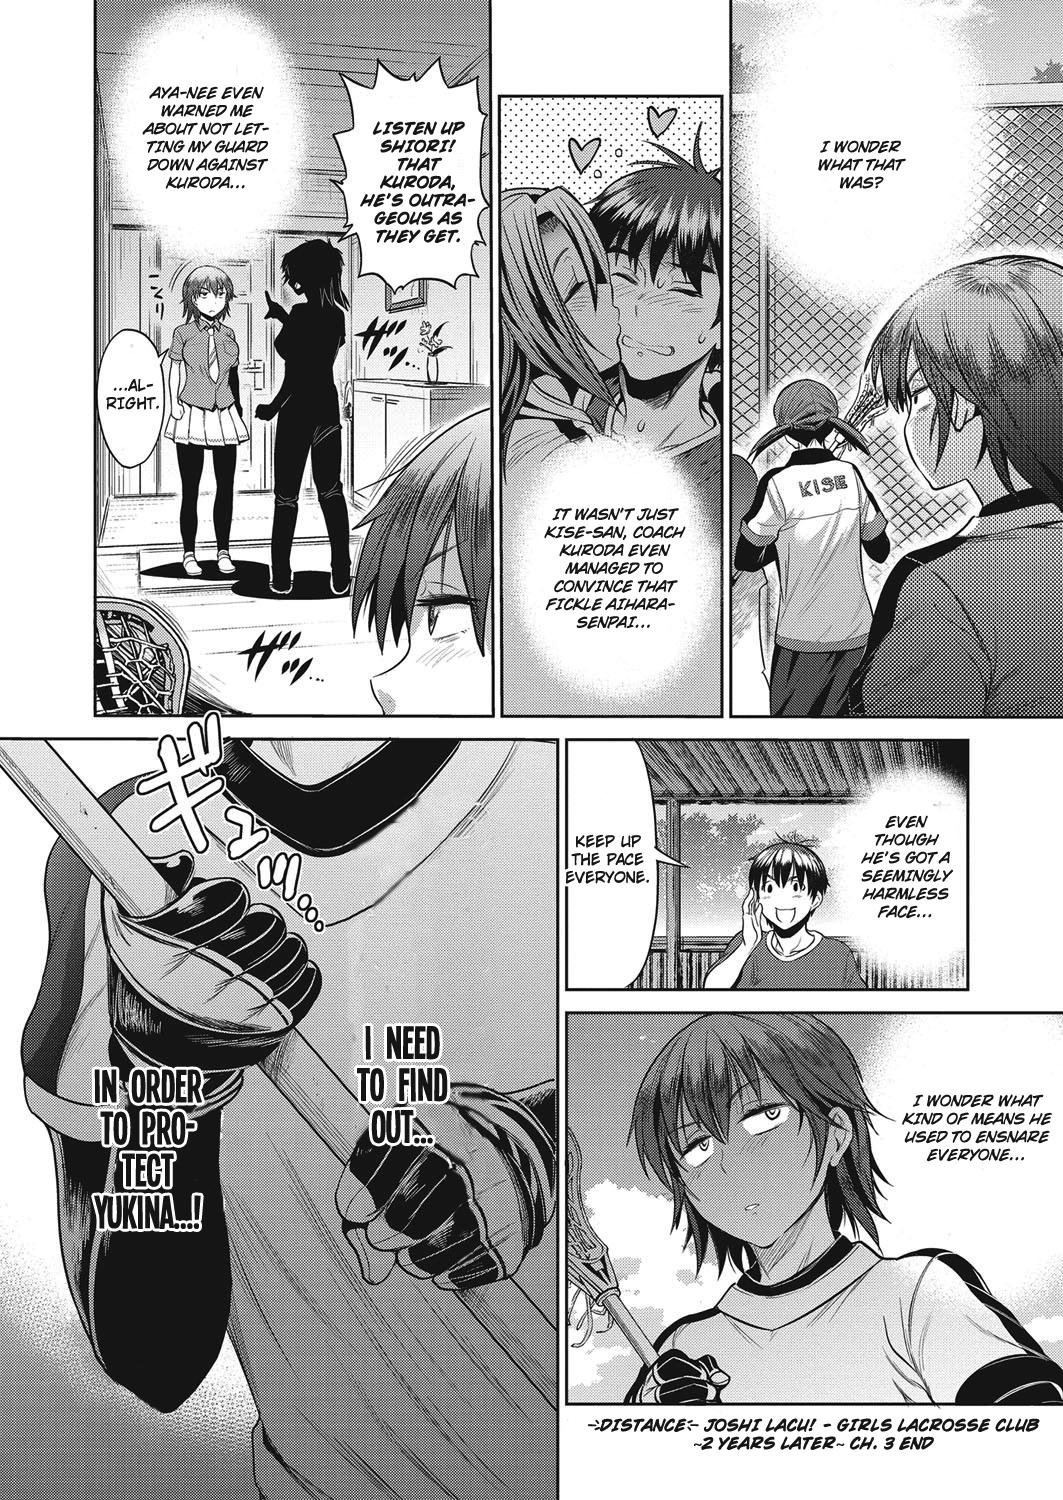 India [DISTANCE] Joshi Lacu! - Girls Lacrosse Club ~2 Years Later~ Ch. 3 (COMIC ExE 04) [English] [TripleSevenScans] [Digital] Shoes - Page 40